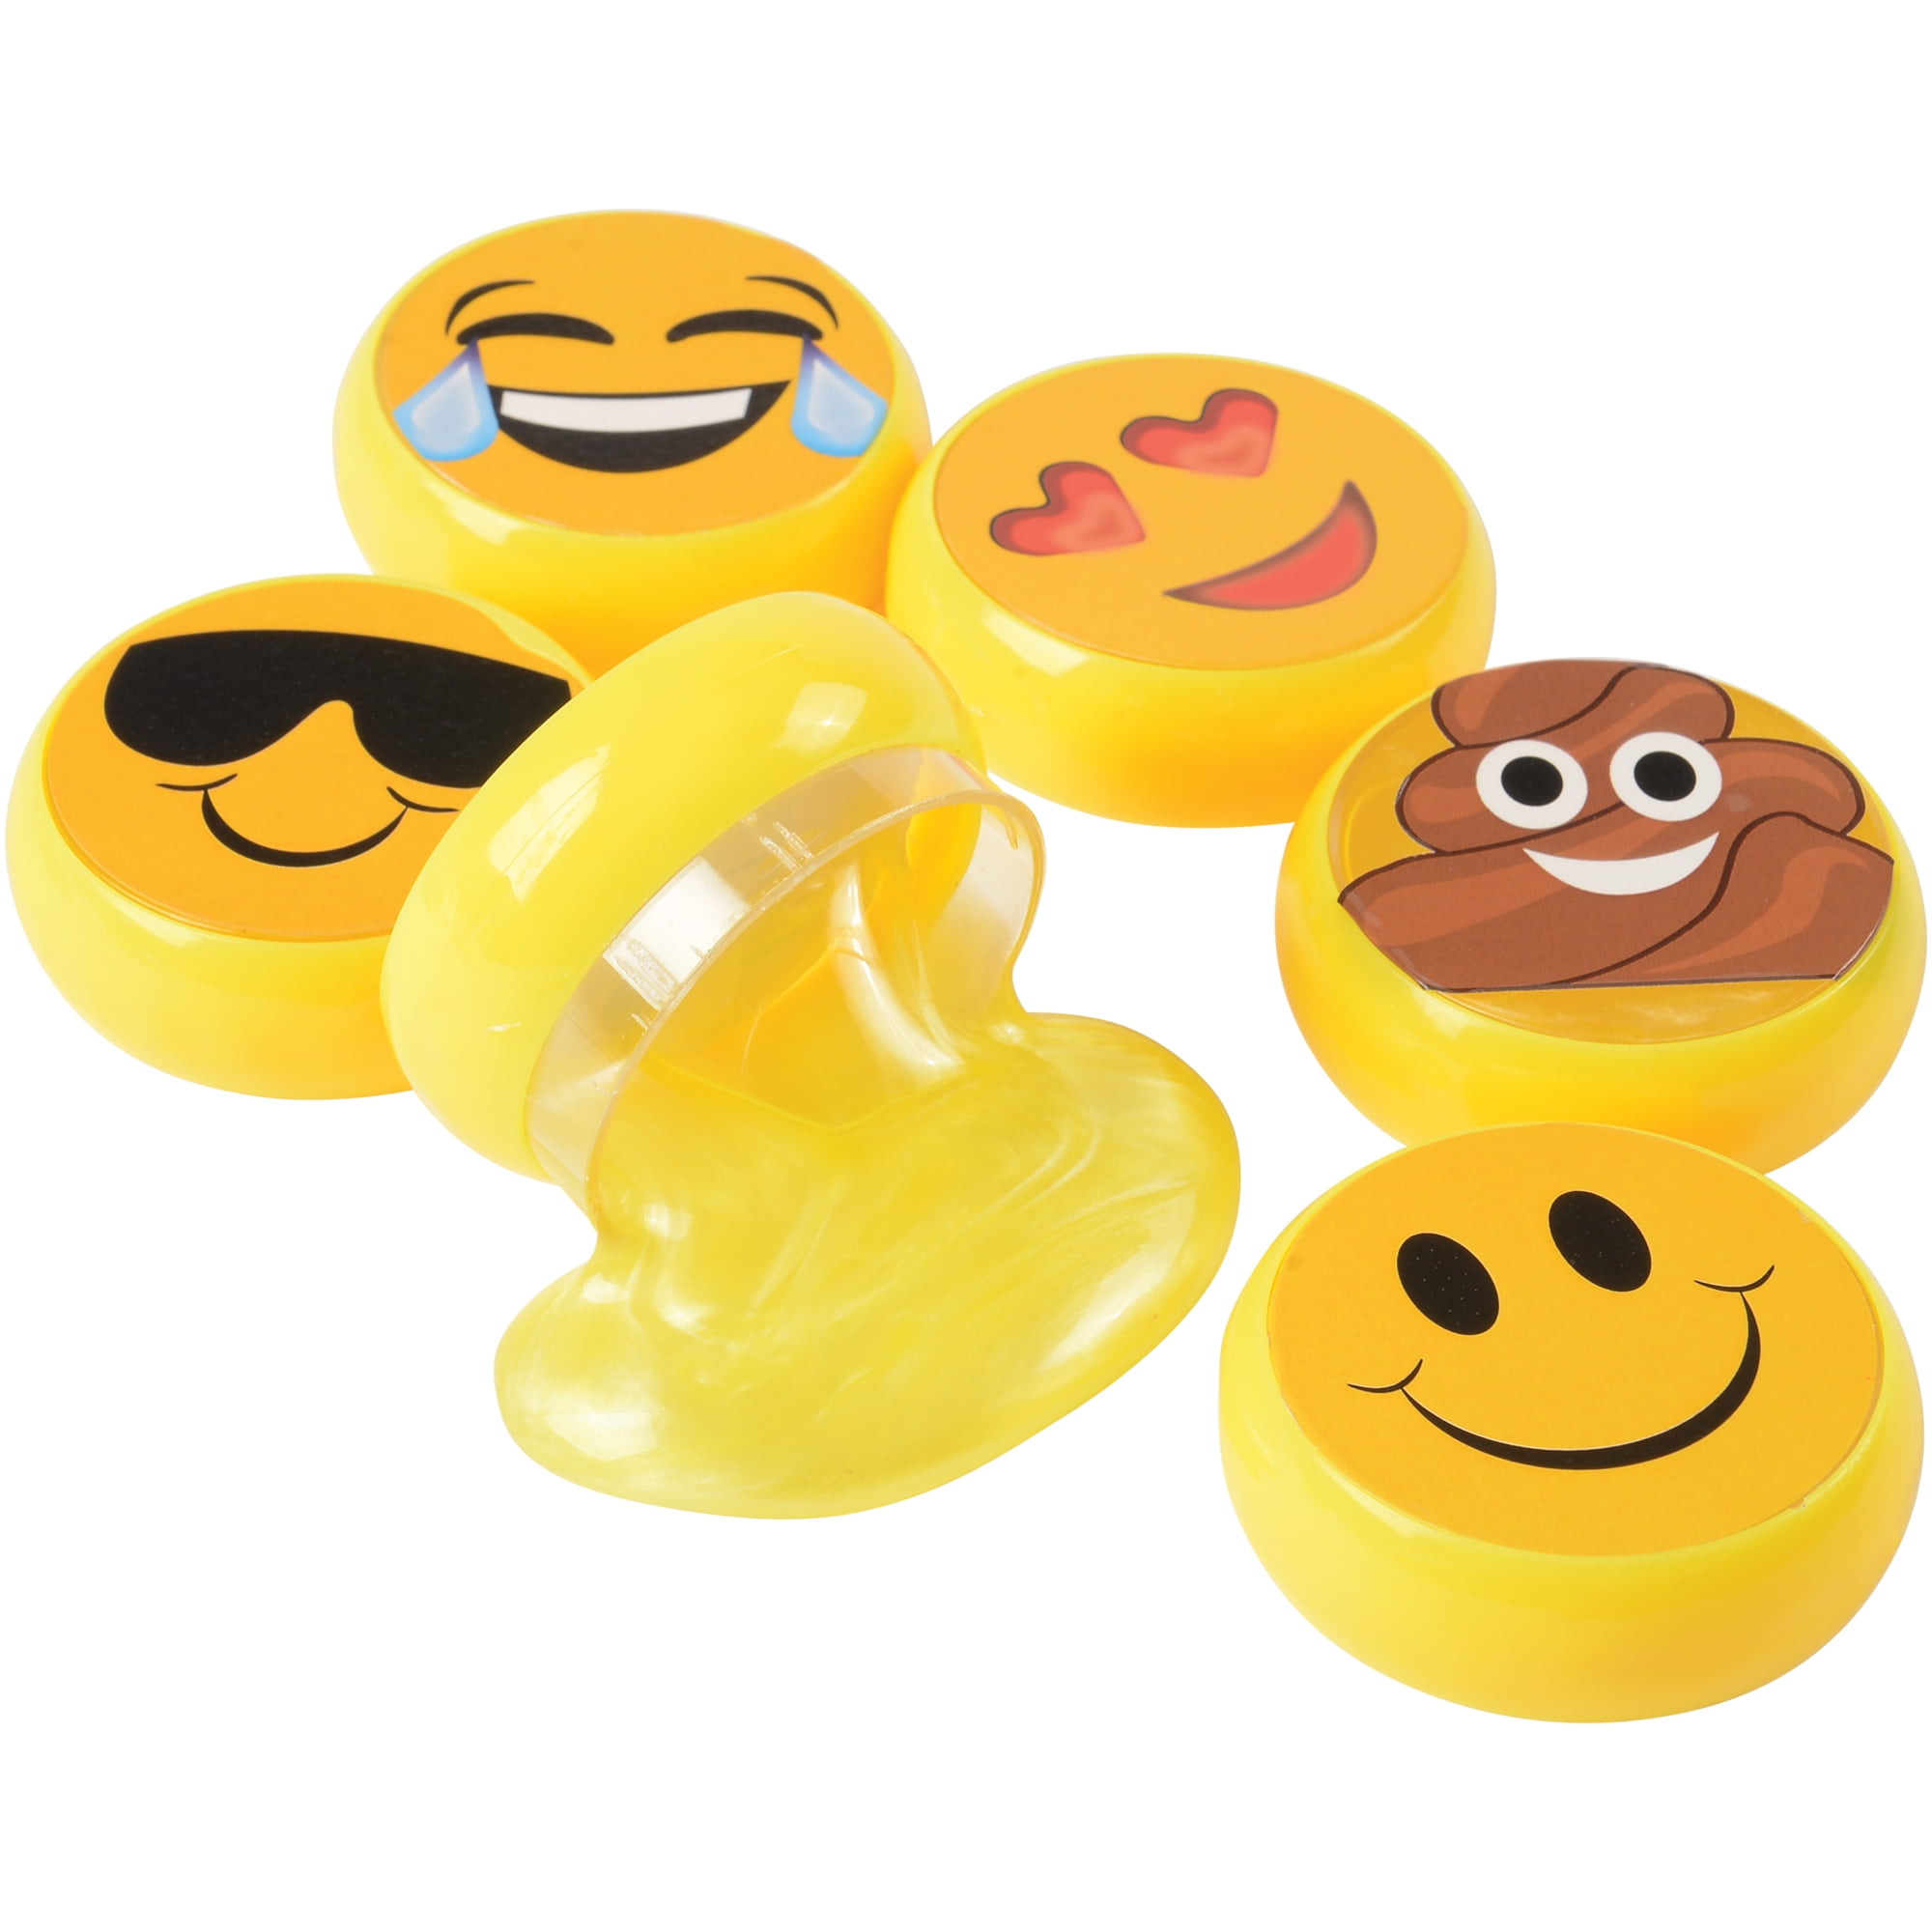 Emoji Collectible Stationery Emoticons Funny Happy Face Gadget Fun Kids Toys Kid 